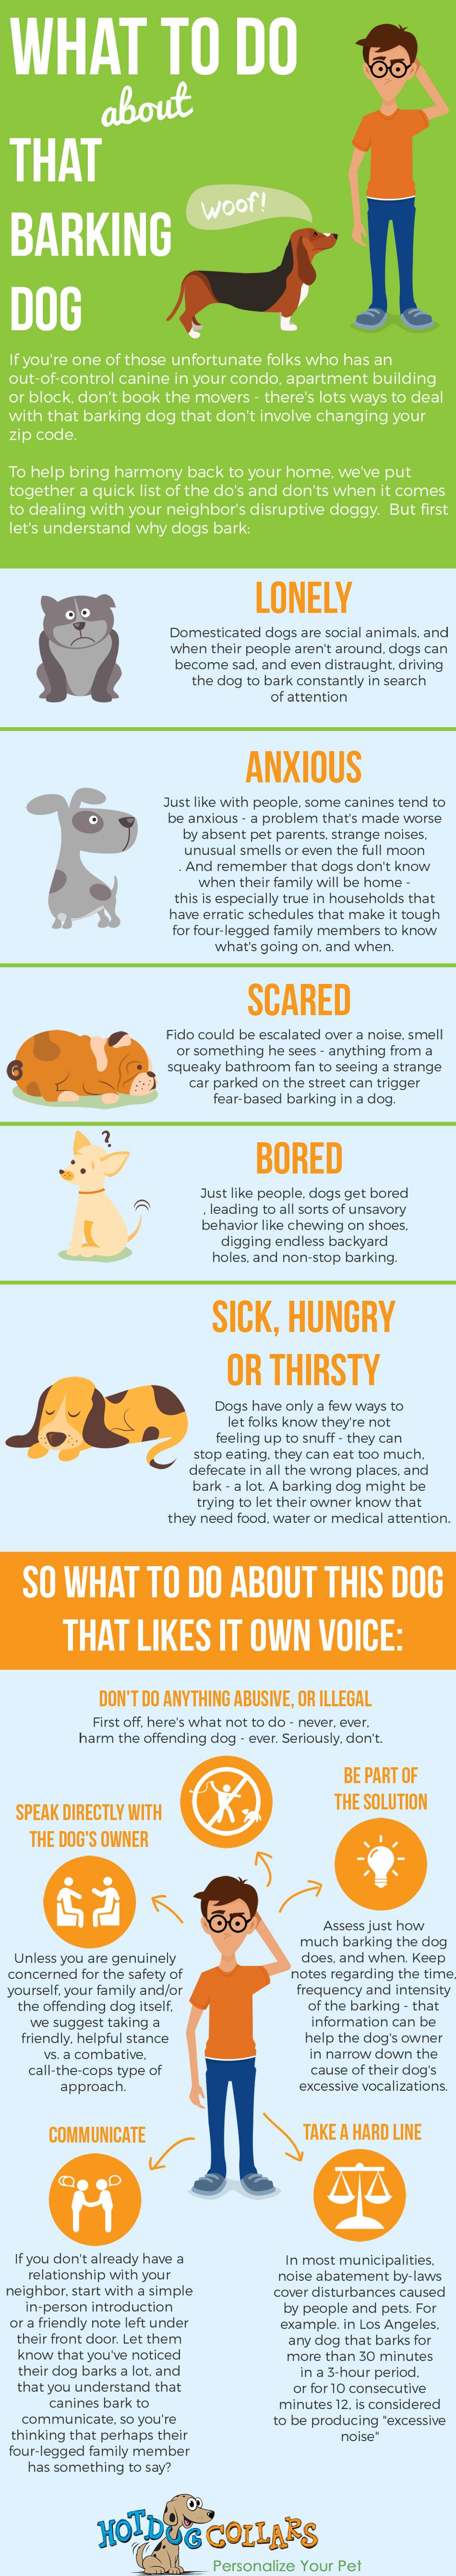 Tips To Help With A Barking Dog